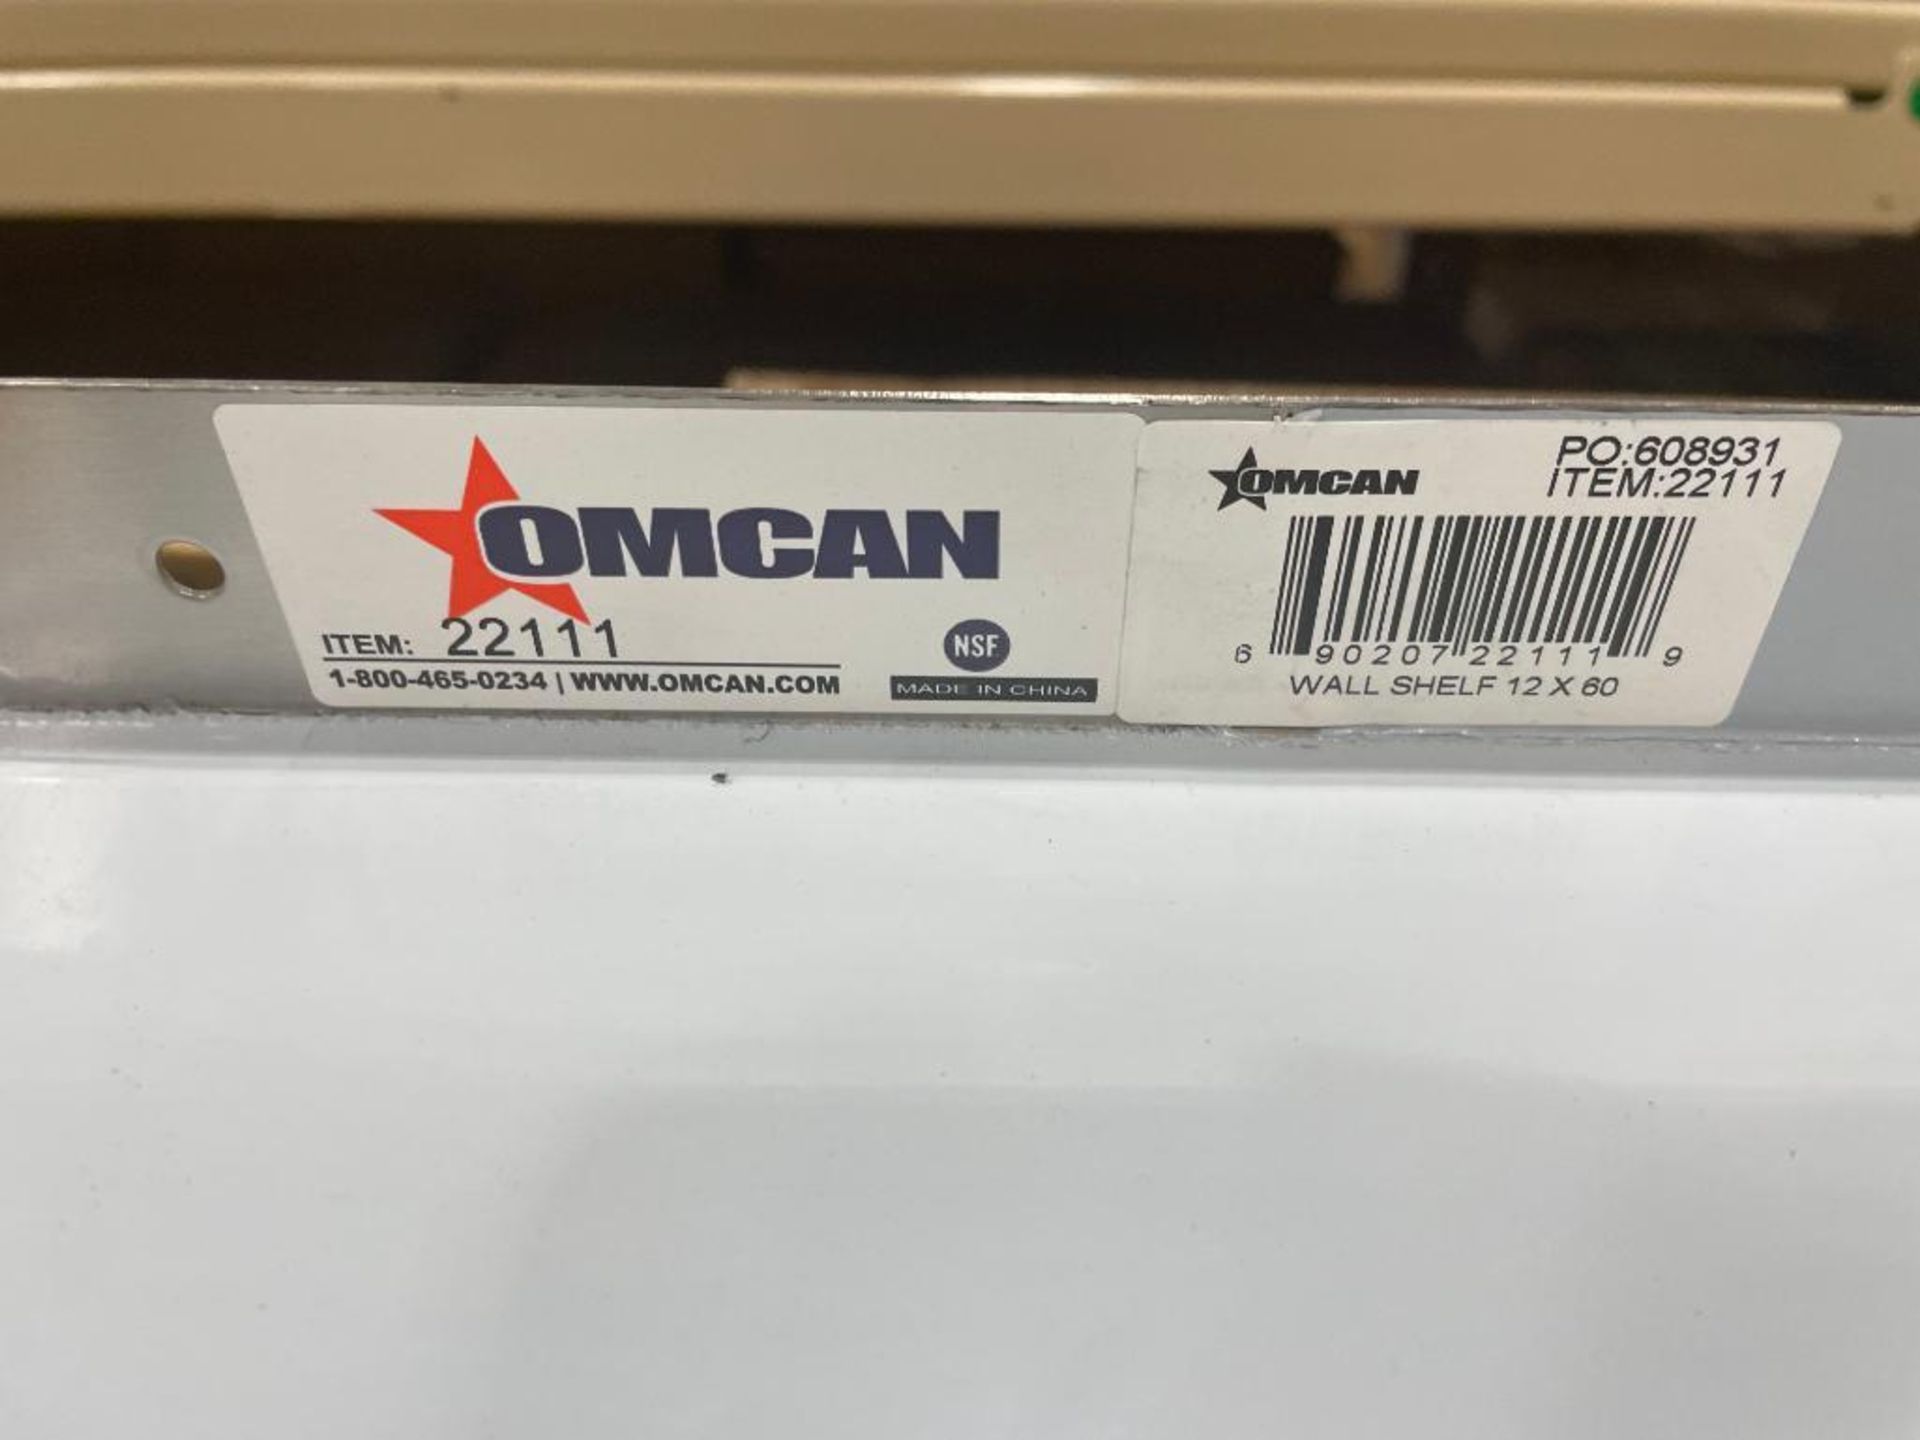 60" X 12" STAINLESS STEEL WALL SHELF - OMCAN 22111 - NEW - Image 4 of 4